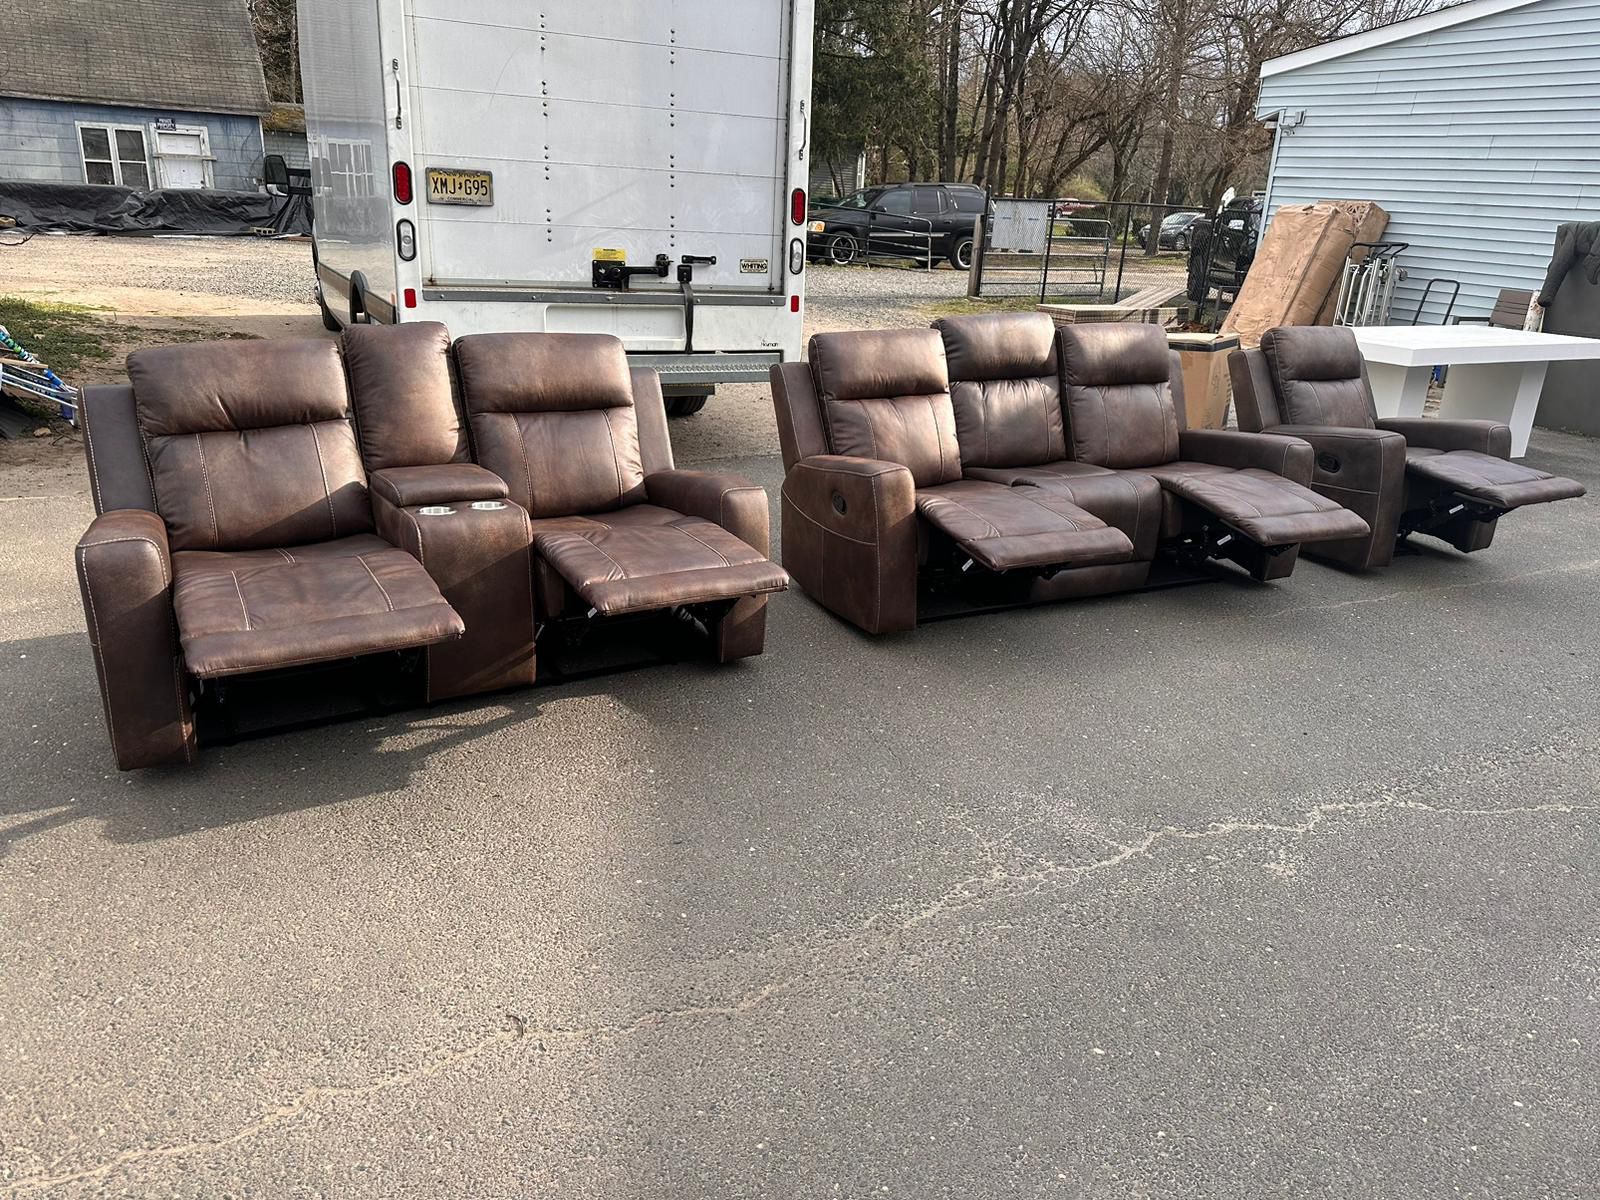 FREE DELIVERY AND INSTALLATION - 🚚 New Reclining Sofa, LoveSeat and Chair - Brand new in boxe